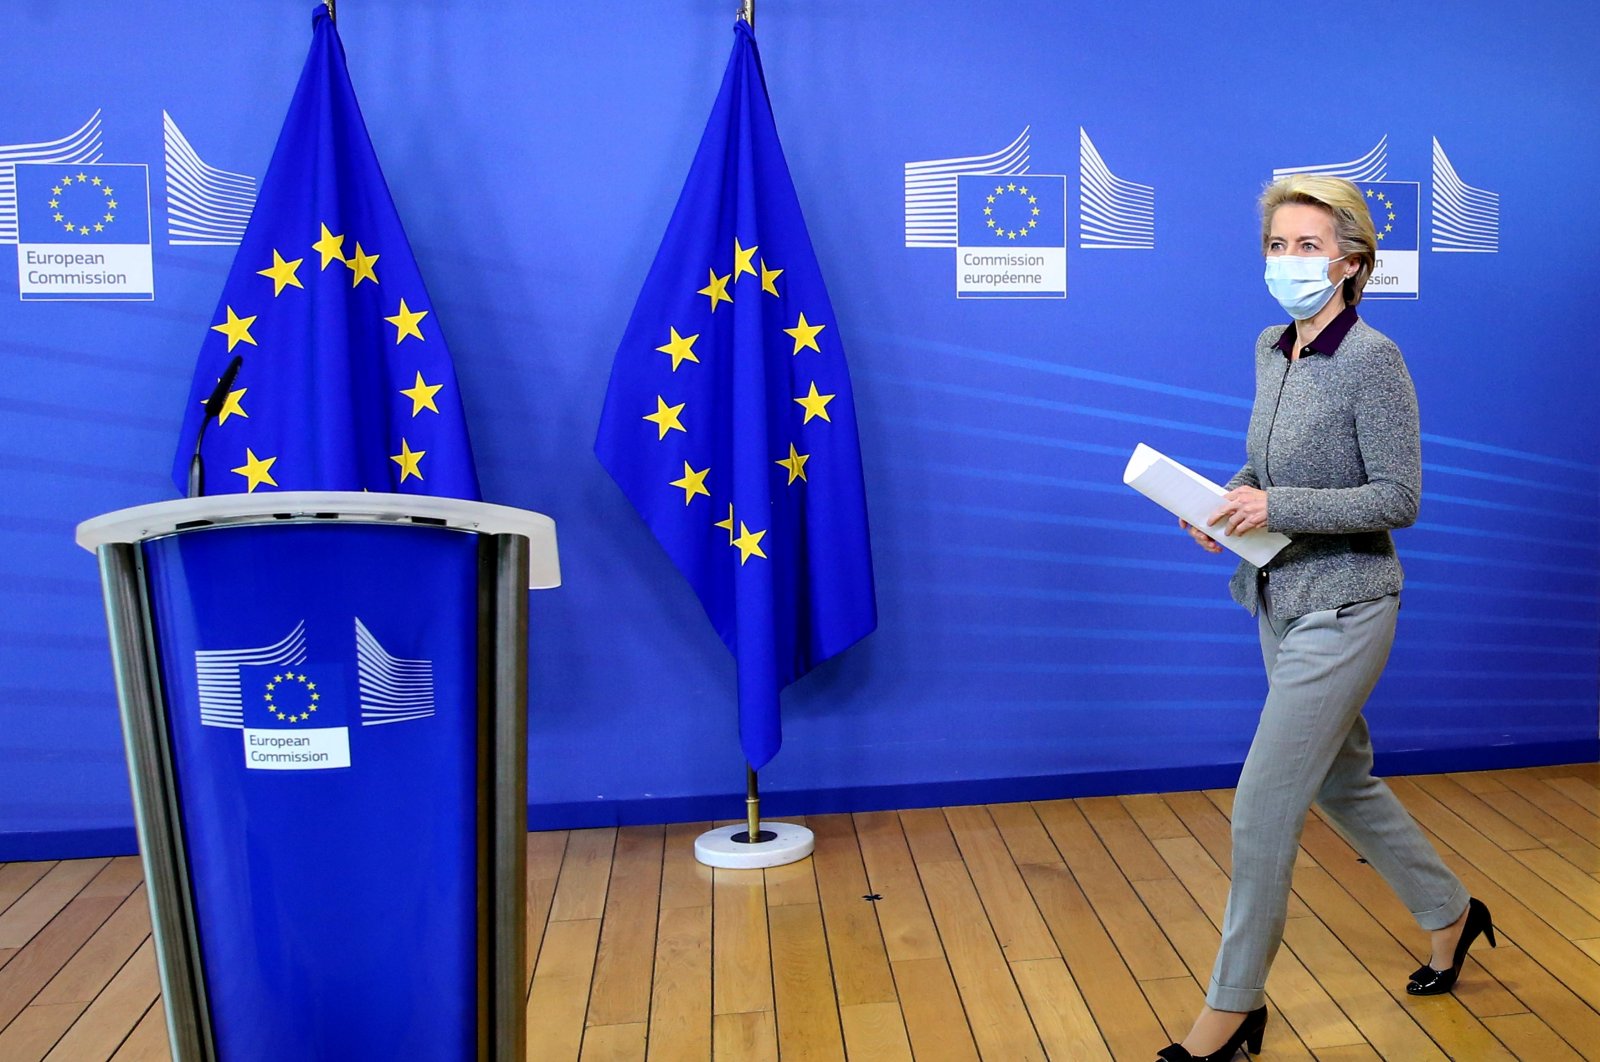 President of the European Commission Ursula von der Leyen, wearing a protective face mask, arrives for a media conference at EU headquarters in Brussels, Aug. 27, 2020. (AP Photo)